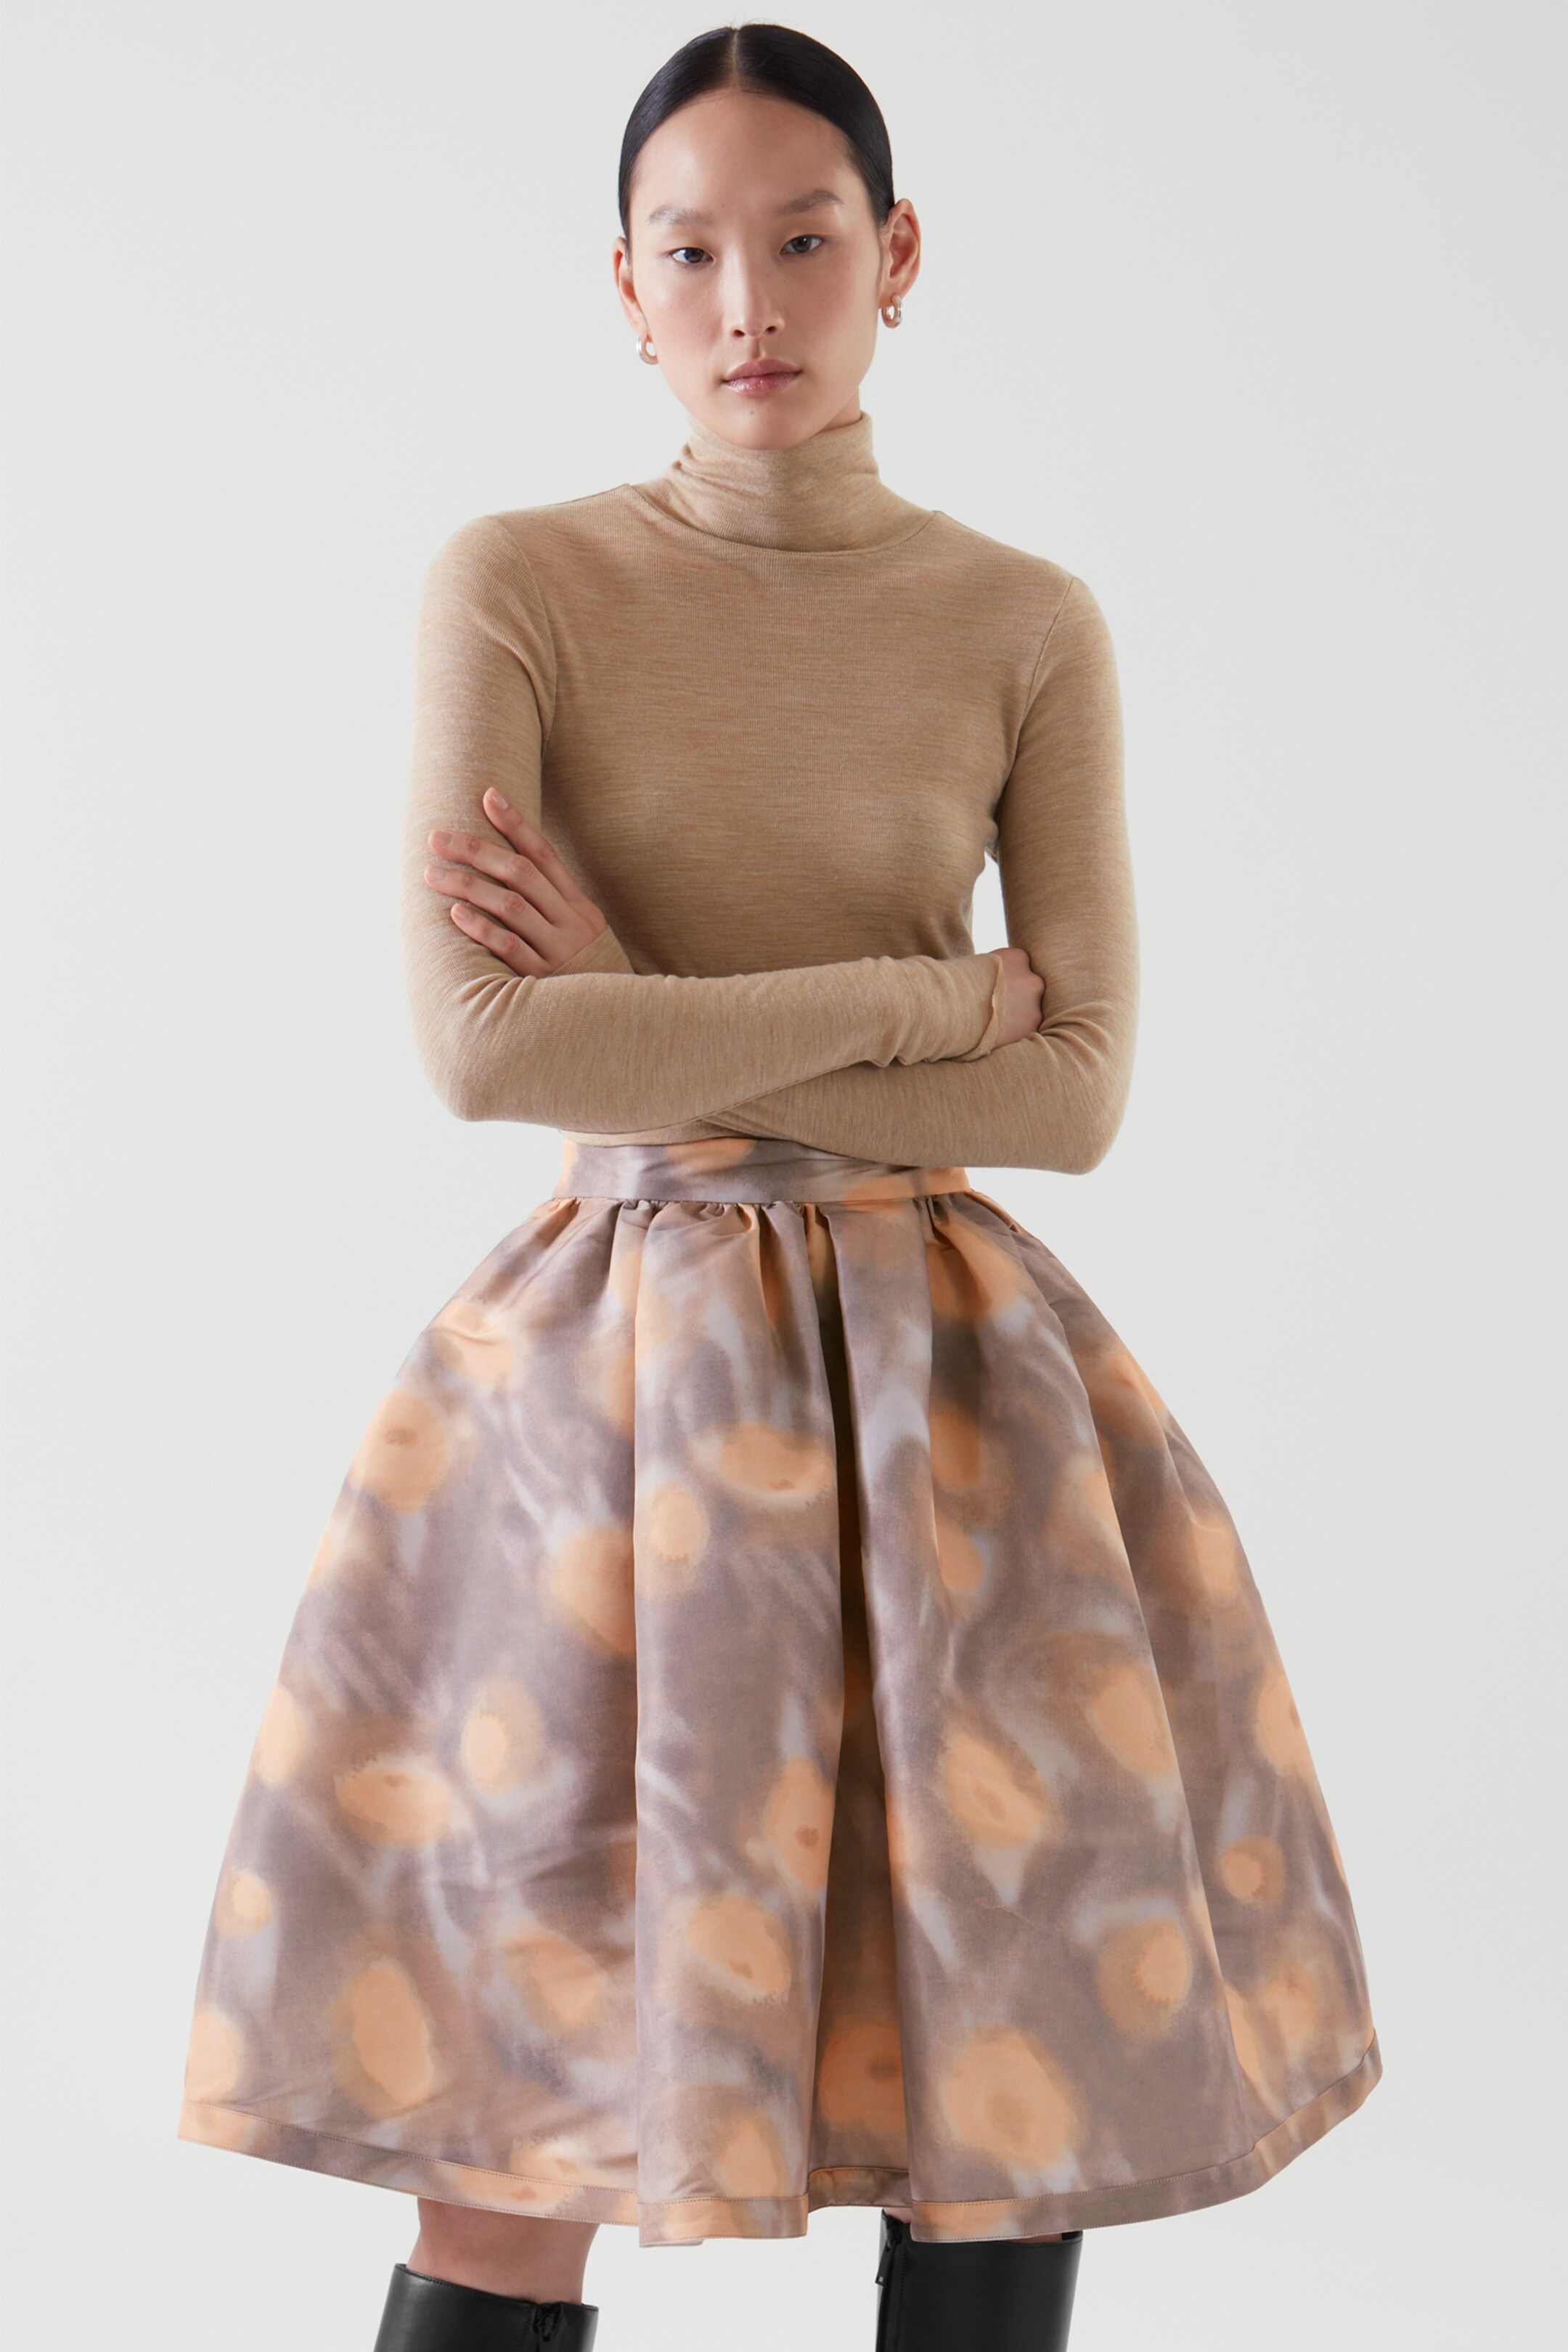 Bottom image of cos PLEATED A-LINE SKIRT in SOFT PINK